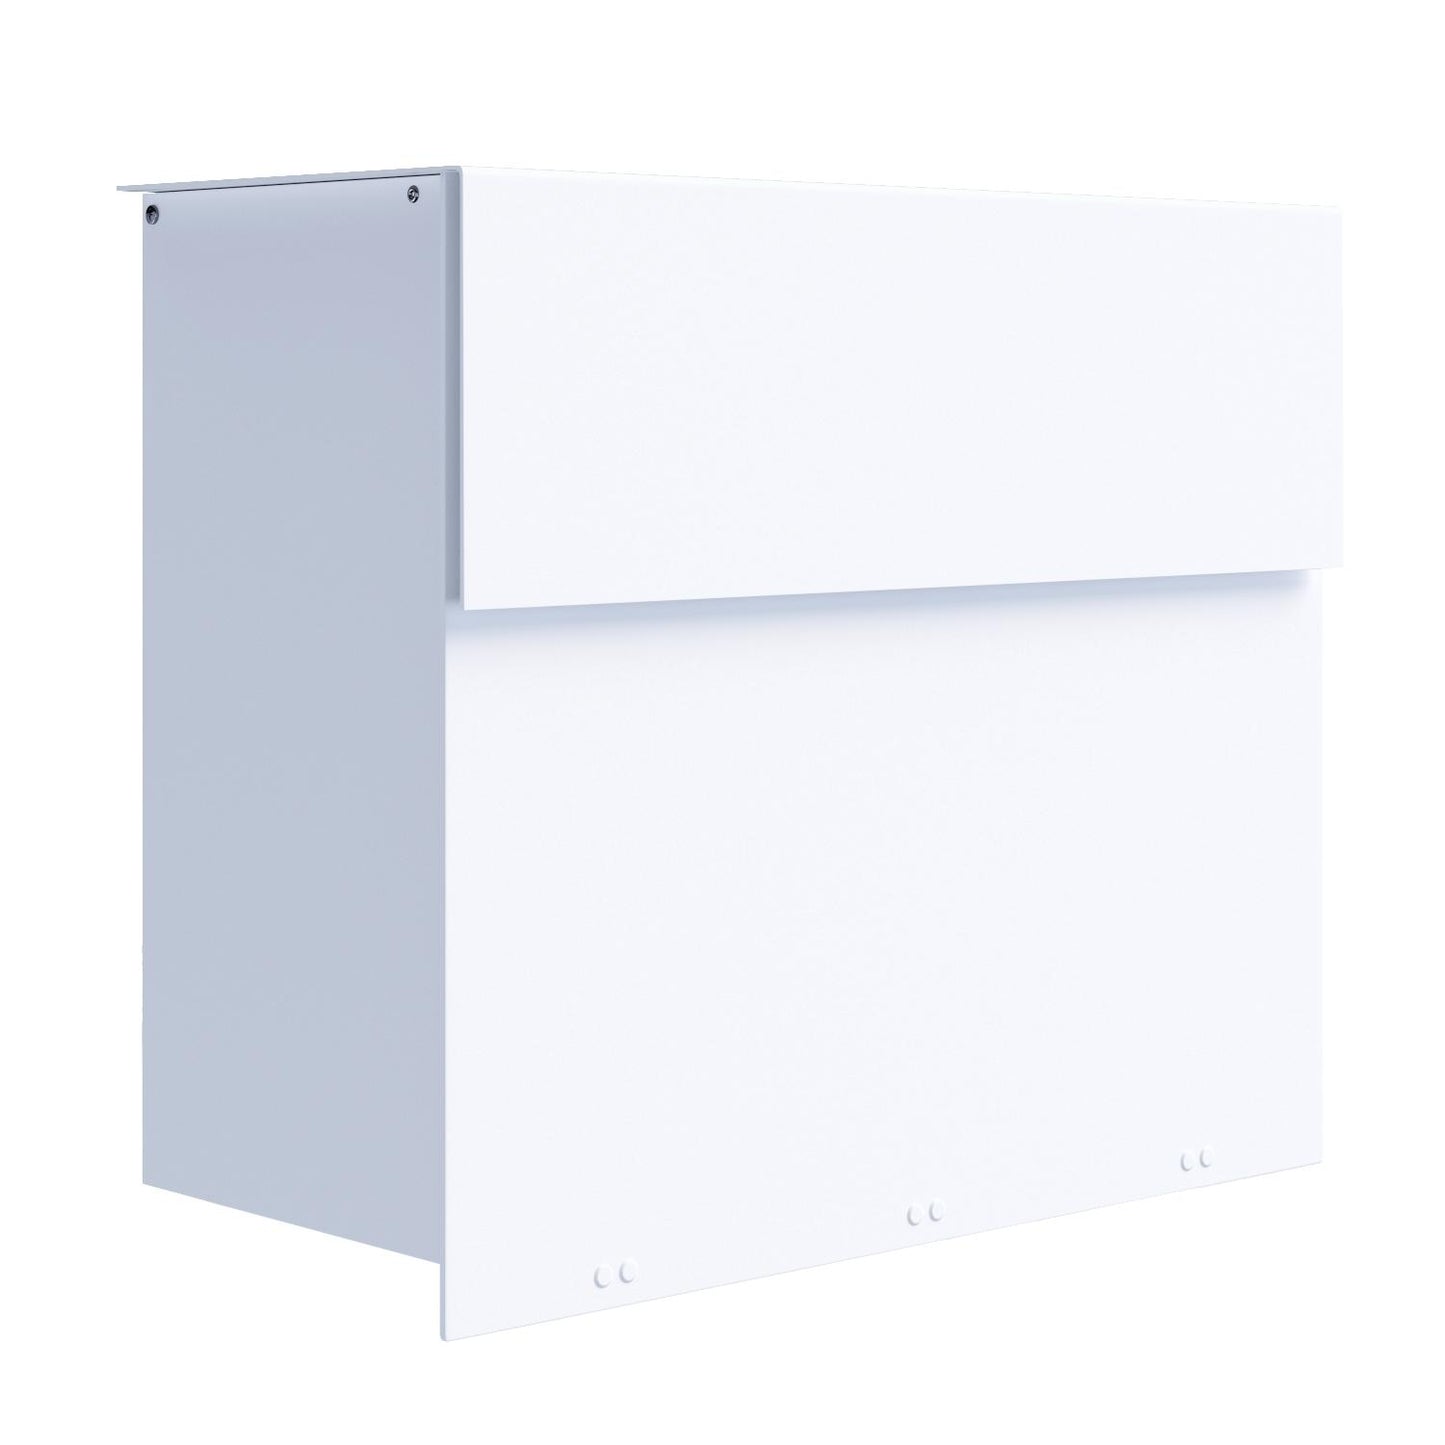 MOLTO by Bravios - Modern wall-mounted white mailbox